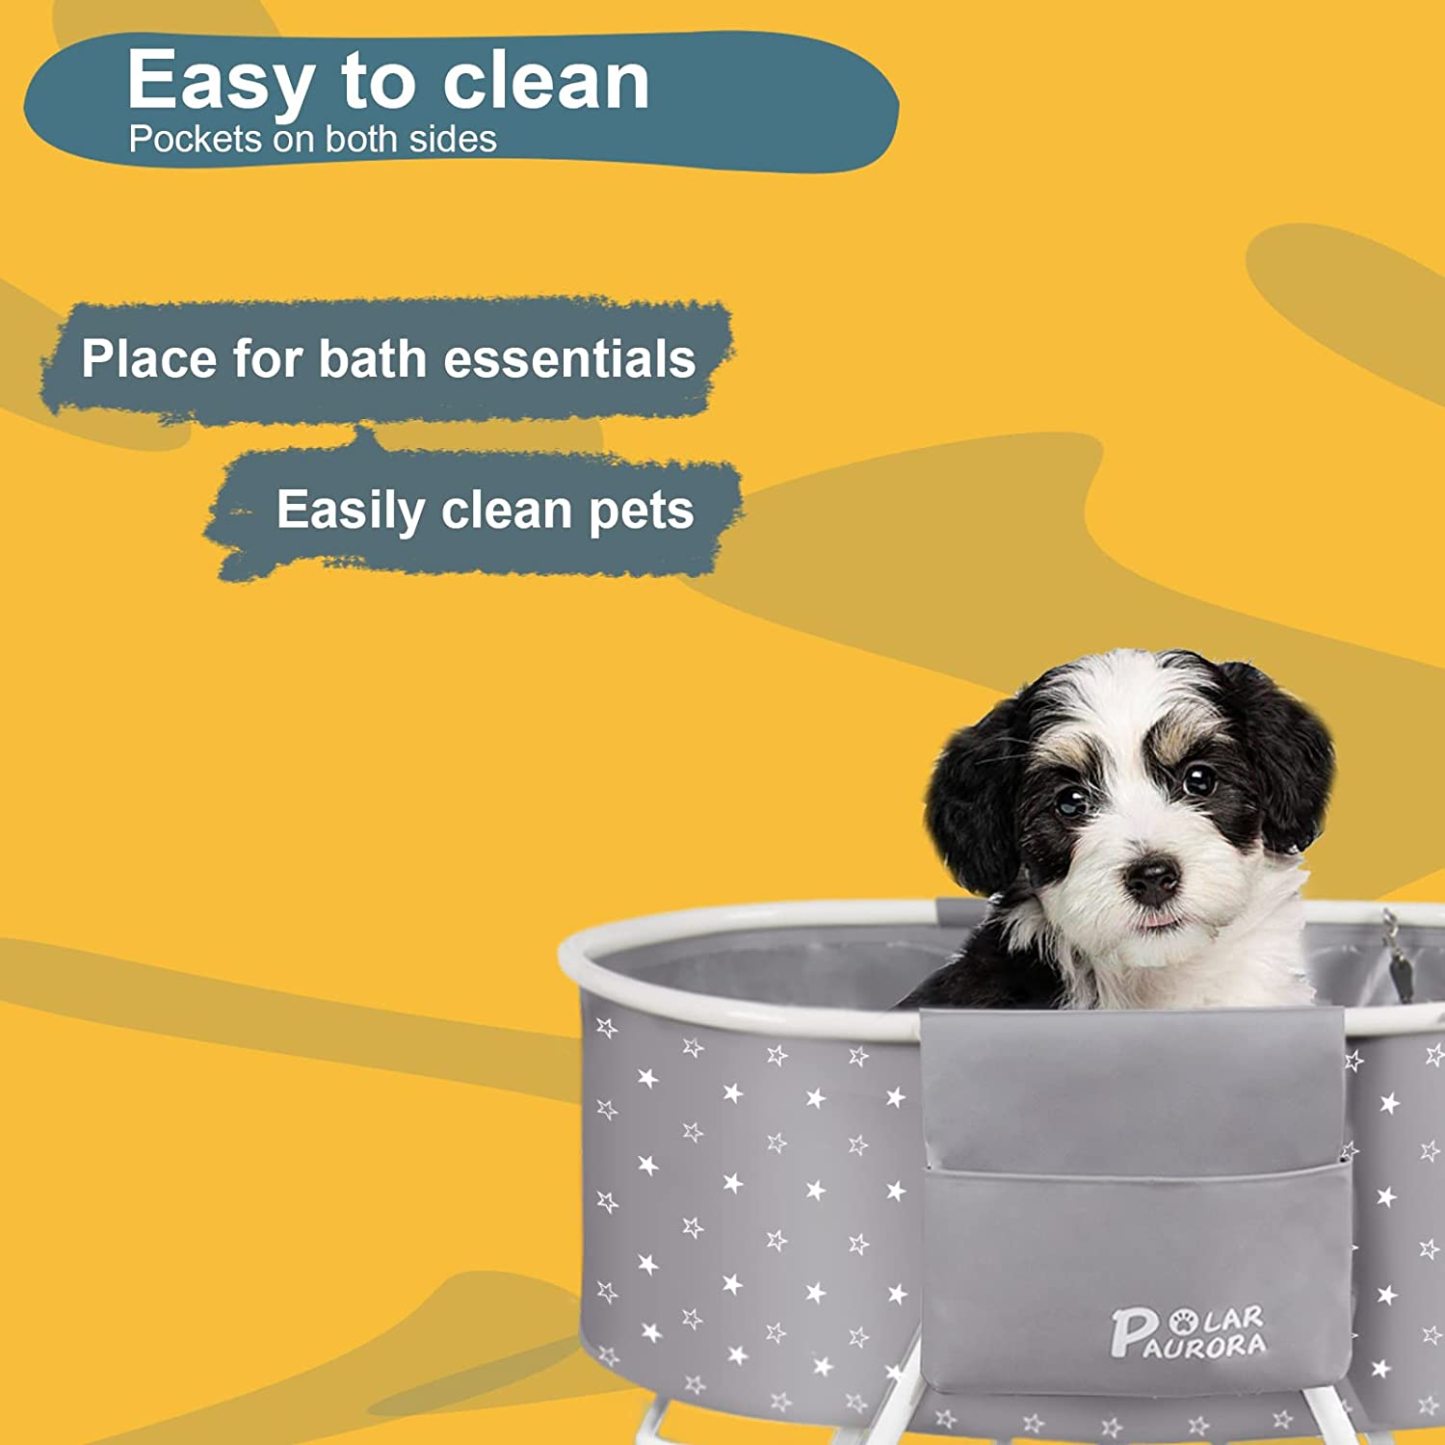 Elevated folding dog bathtub, suitable for small and medium dogs and cats